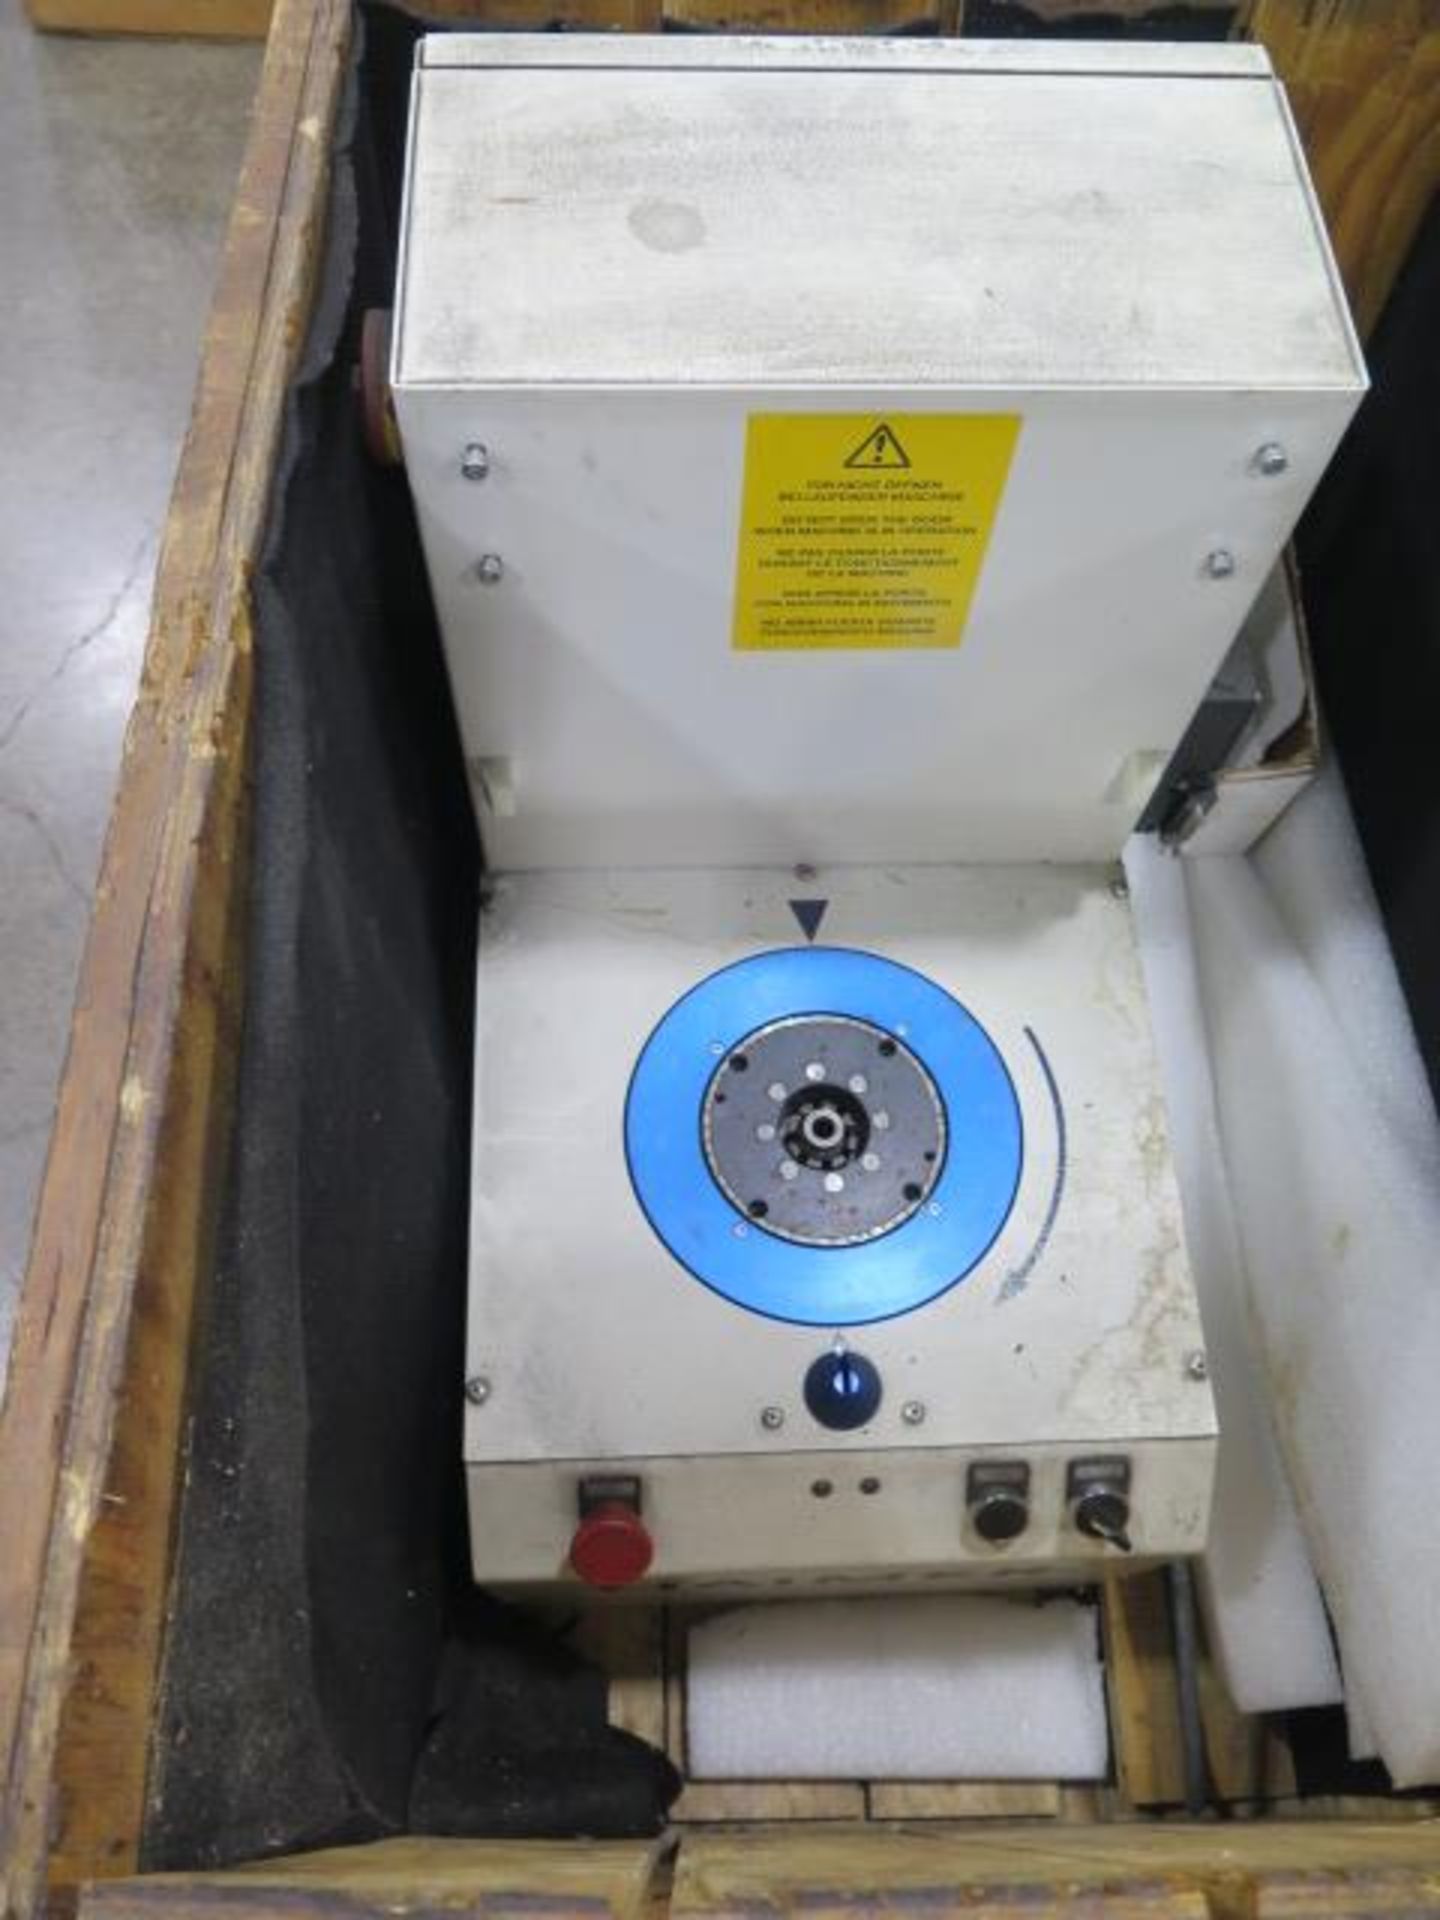 Haimer Tooling Heat Shrinker (CONDITION UNKNOWN) (SOLD AS-IS - NO WARRANTY) - Image 2 of 5